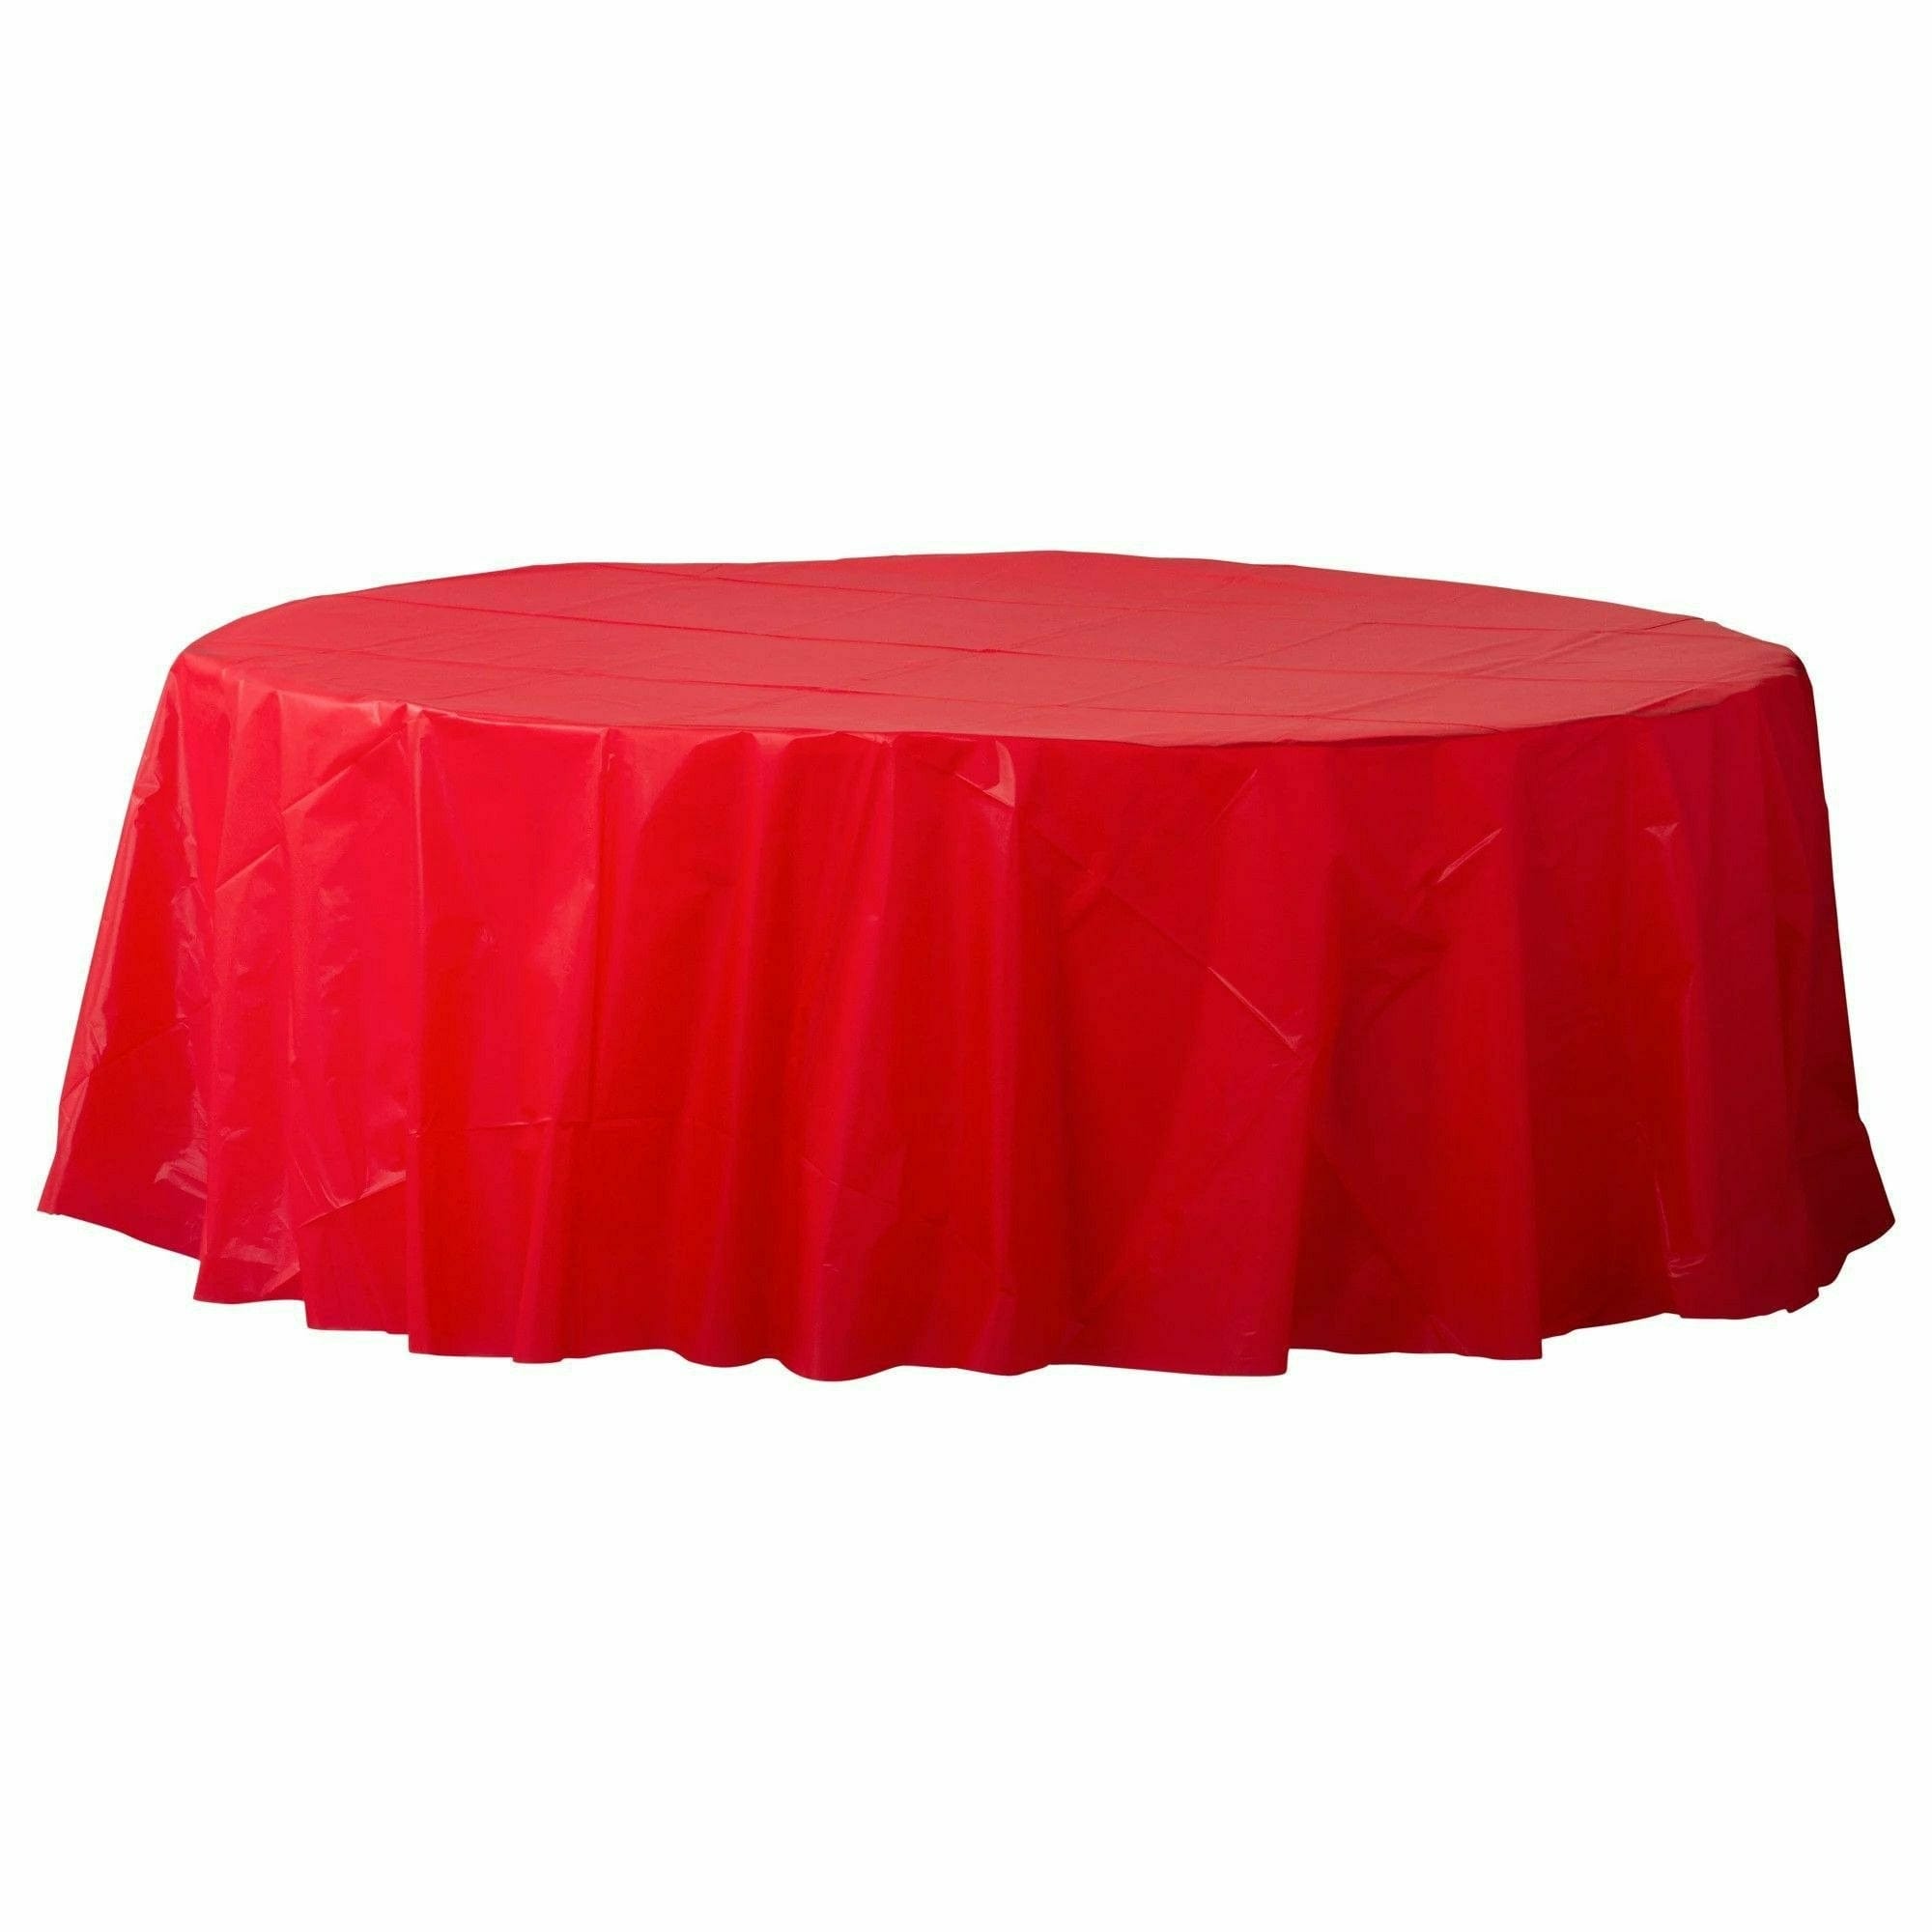 Amscan BASIC Apple Red - 84" Round Plastic Table Cover